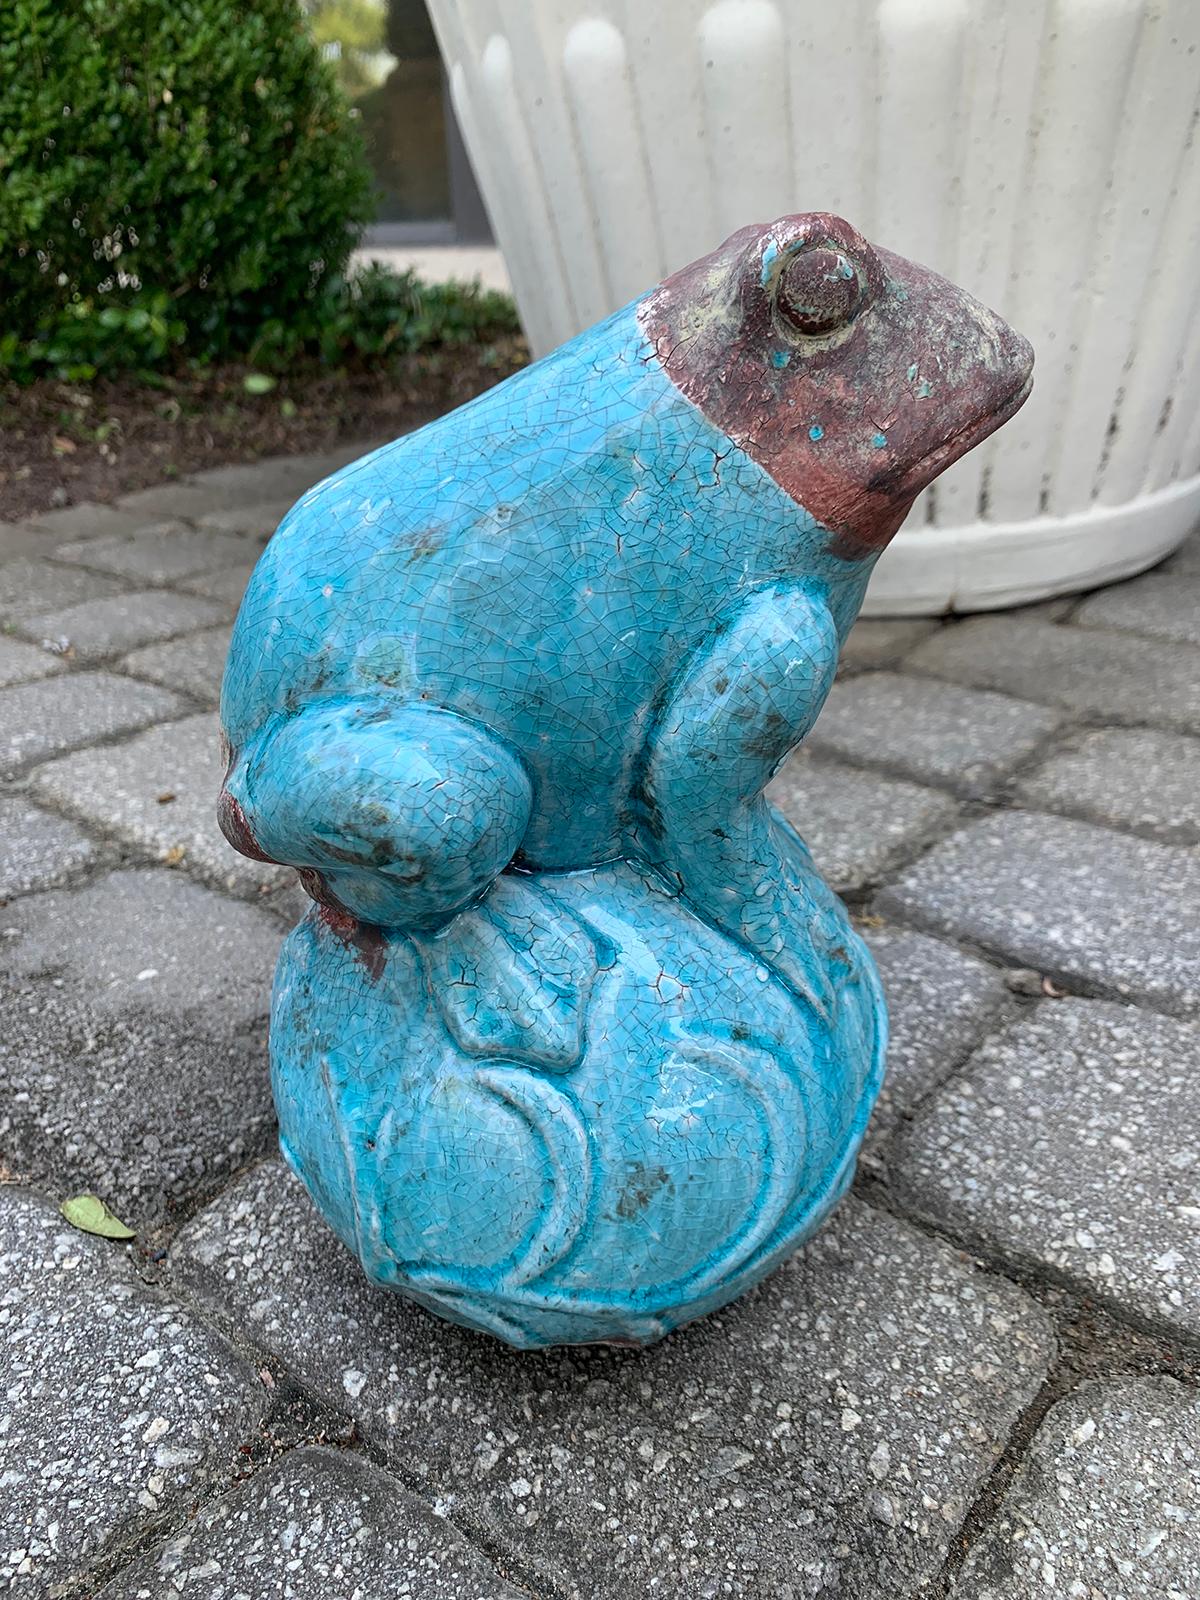 20th century glazed pottery perched frog
Whimsical.